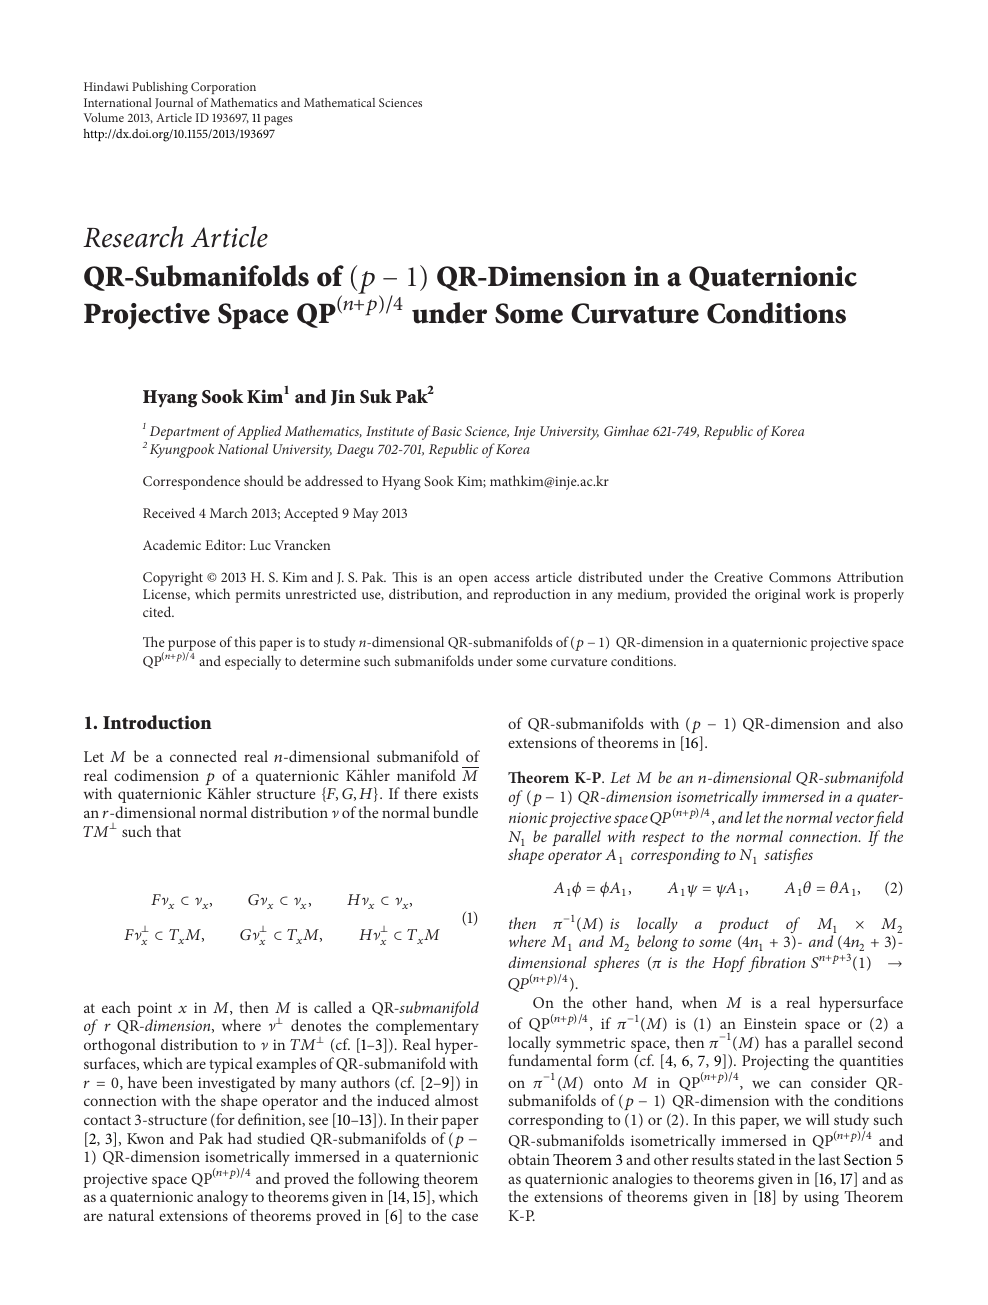 Qr Submanifolds Of P 1 Qr Dimension In A Quaternionic Projective Space Q P N P 4 Under Some Curvature Conditions Topic Of Research